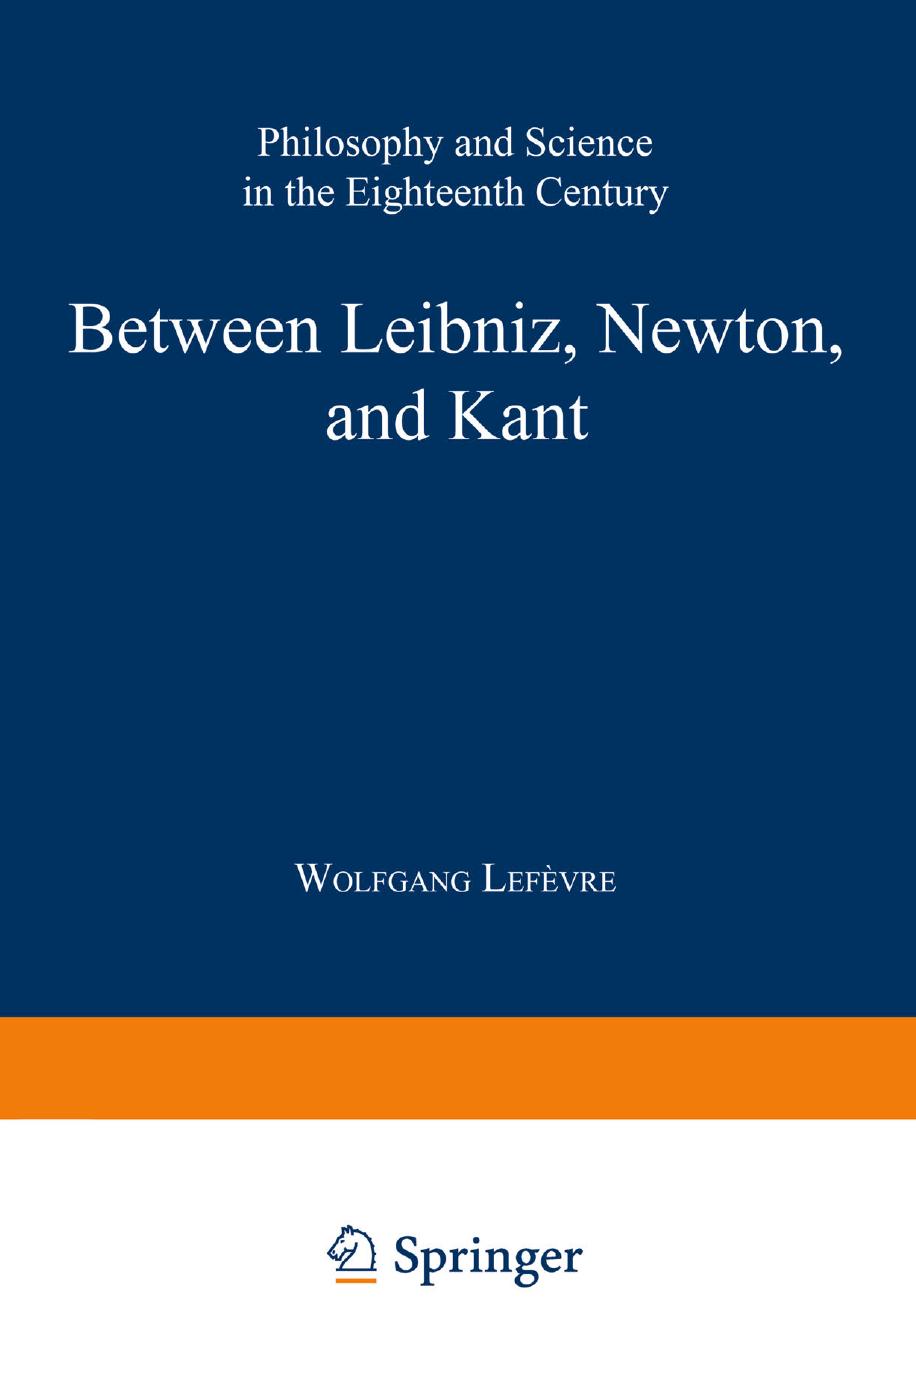 Between Leibniz, Newton, and Kant: Philosophy and Science in the Eighteenth Century